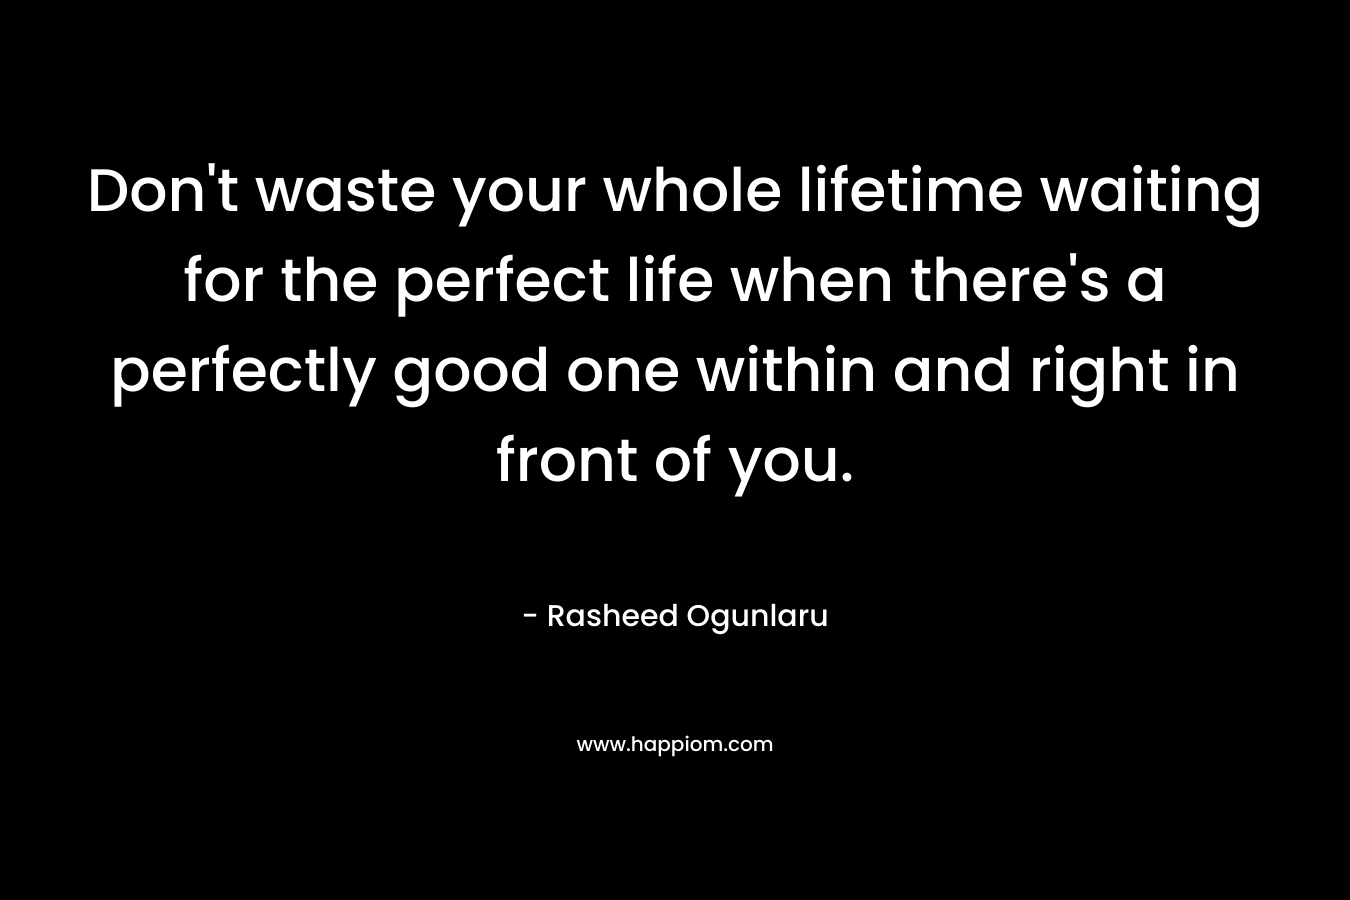 Don't waste your whole lifetime waiting for the perfect life when there's a perfectly good one within and right in front of you.